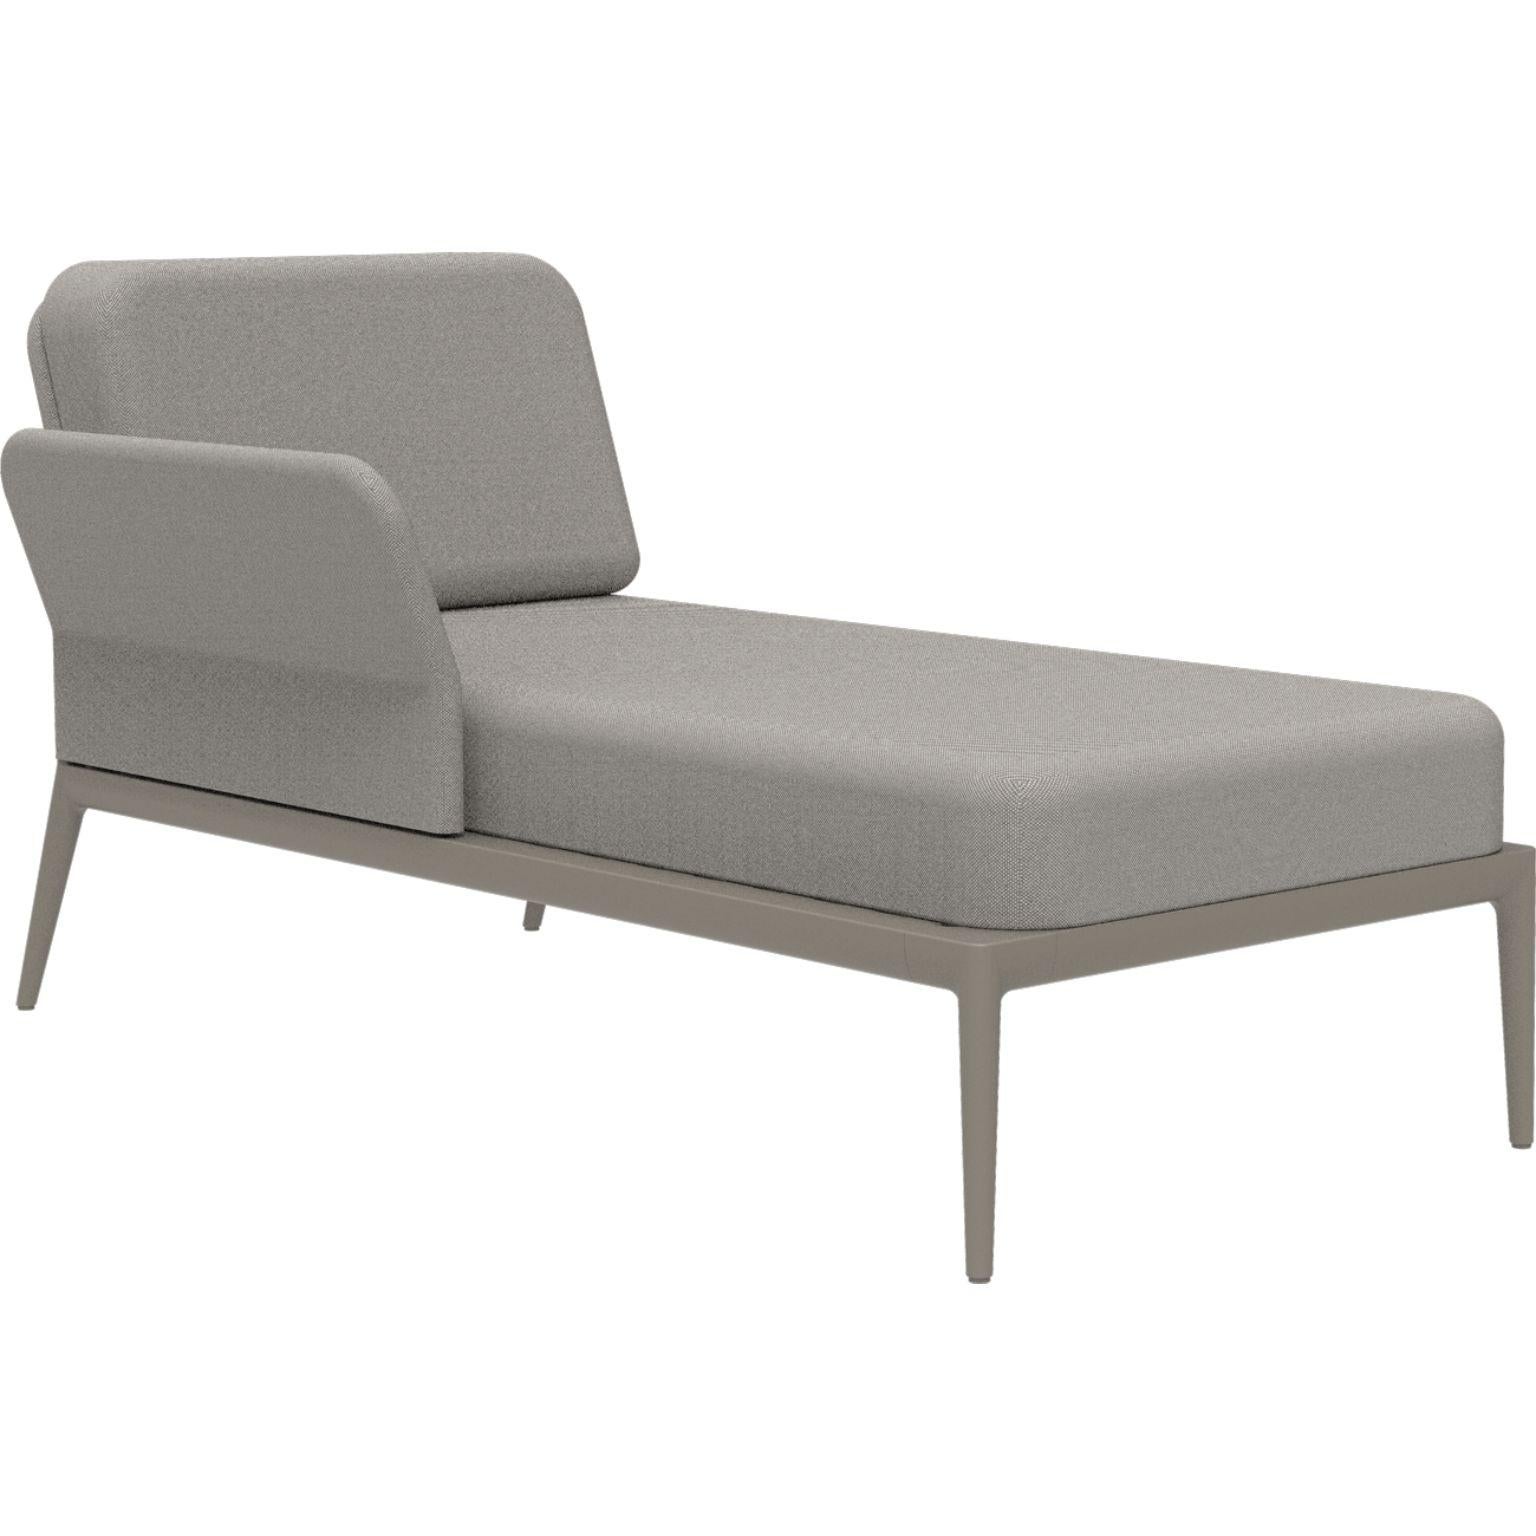 Cover Cream Right Chaise Longue by MOWEE
Dimensions: D 80 x W 155 x H 81 cm (seat height 42 cm).
Material: Aluminum and upholstery.
Weight: 28 kg.
Also available in different colors and finishes. Please contact us.

An unmistakable collection